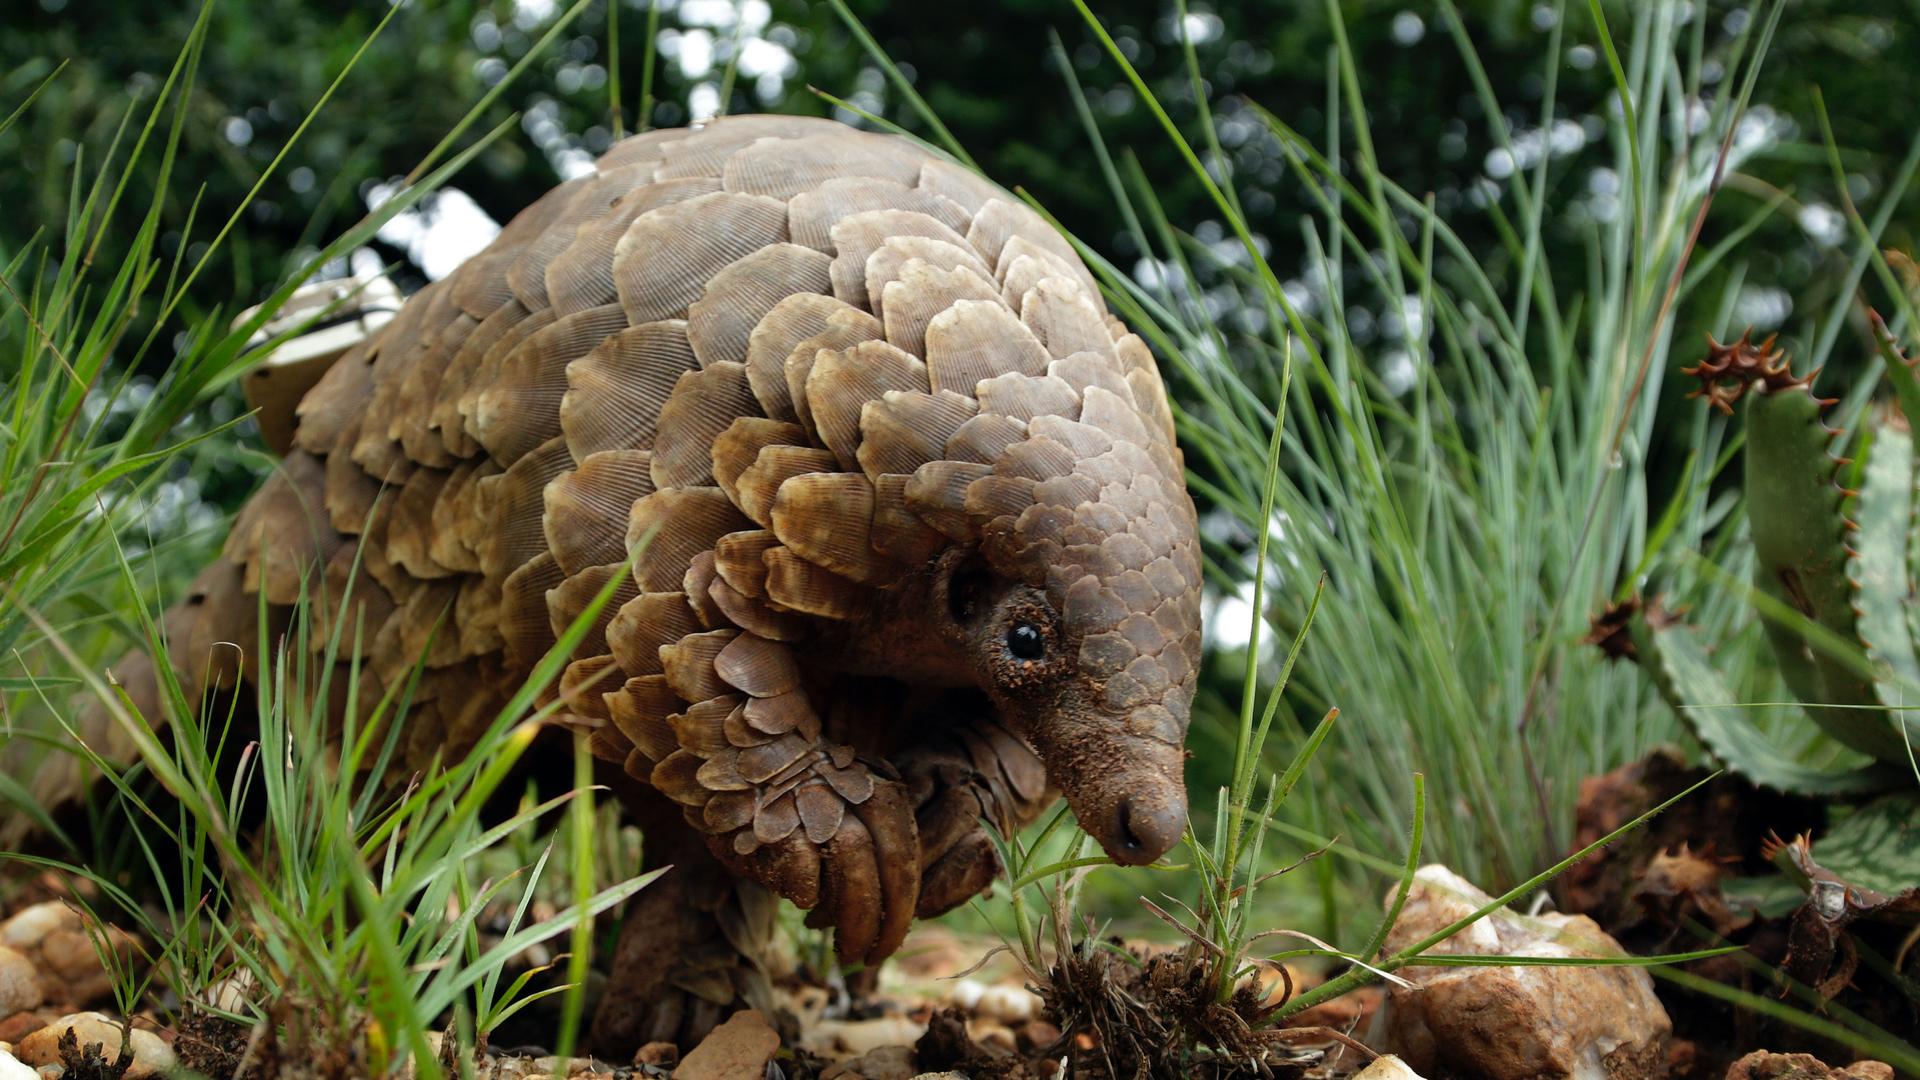 A scaly pangolin with small, brown eyes and a pointy nose forages for food near some greenery. 